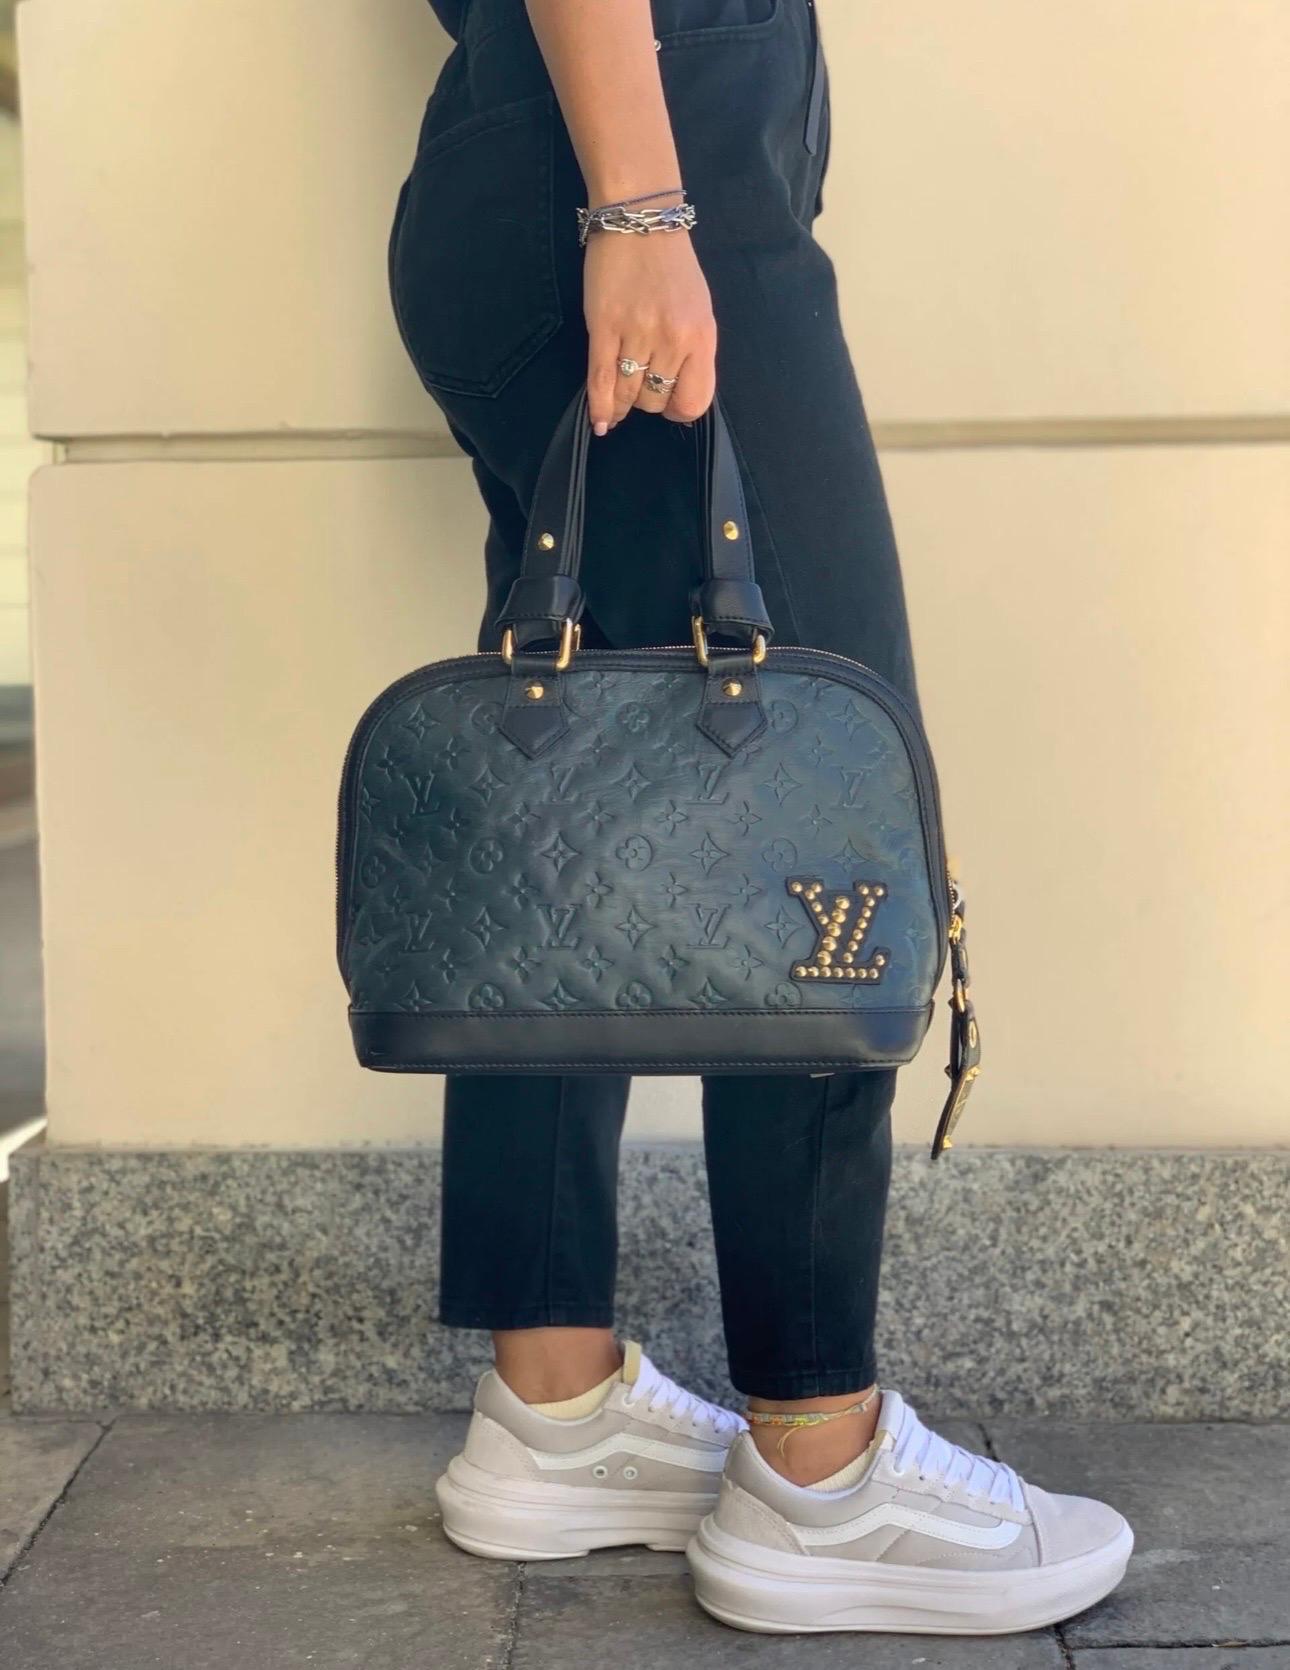 Louis Vuitton bag, Double Jeu Alma model, made of blue empreinte leather and gold hardware. Classic zip closure. Equipped with double leather handle. Equipped with an additional internal pochette made of lurex fabric, and equipped with a double